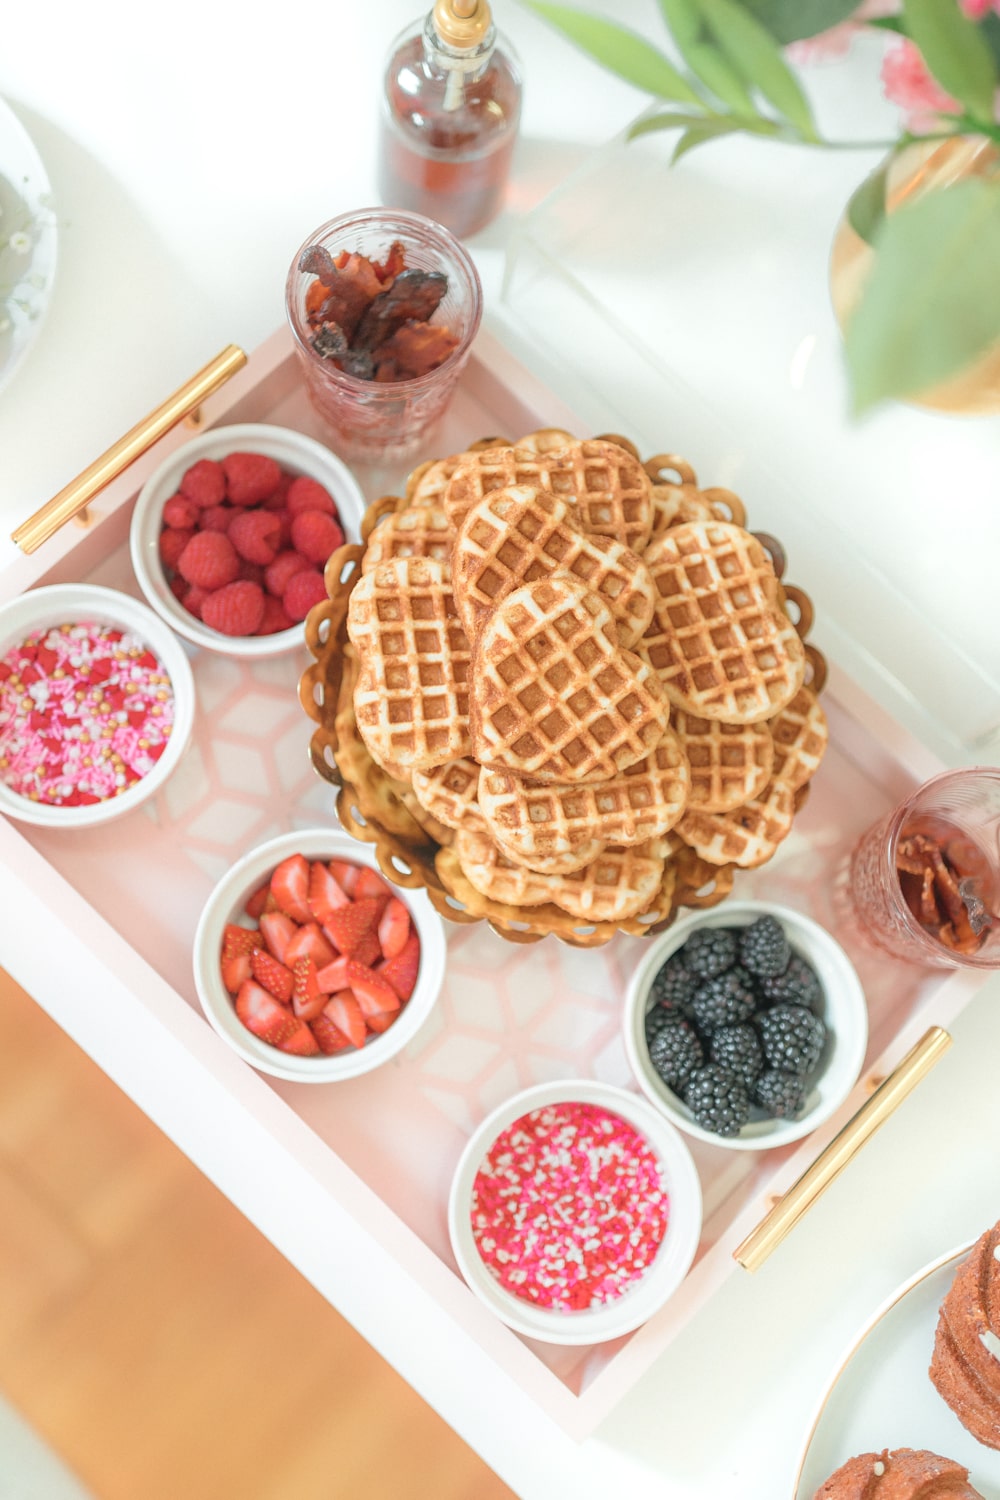 Galentine's Day waffle bar ideas from blogger Stephanie Ziajka on Diary of a Debutante